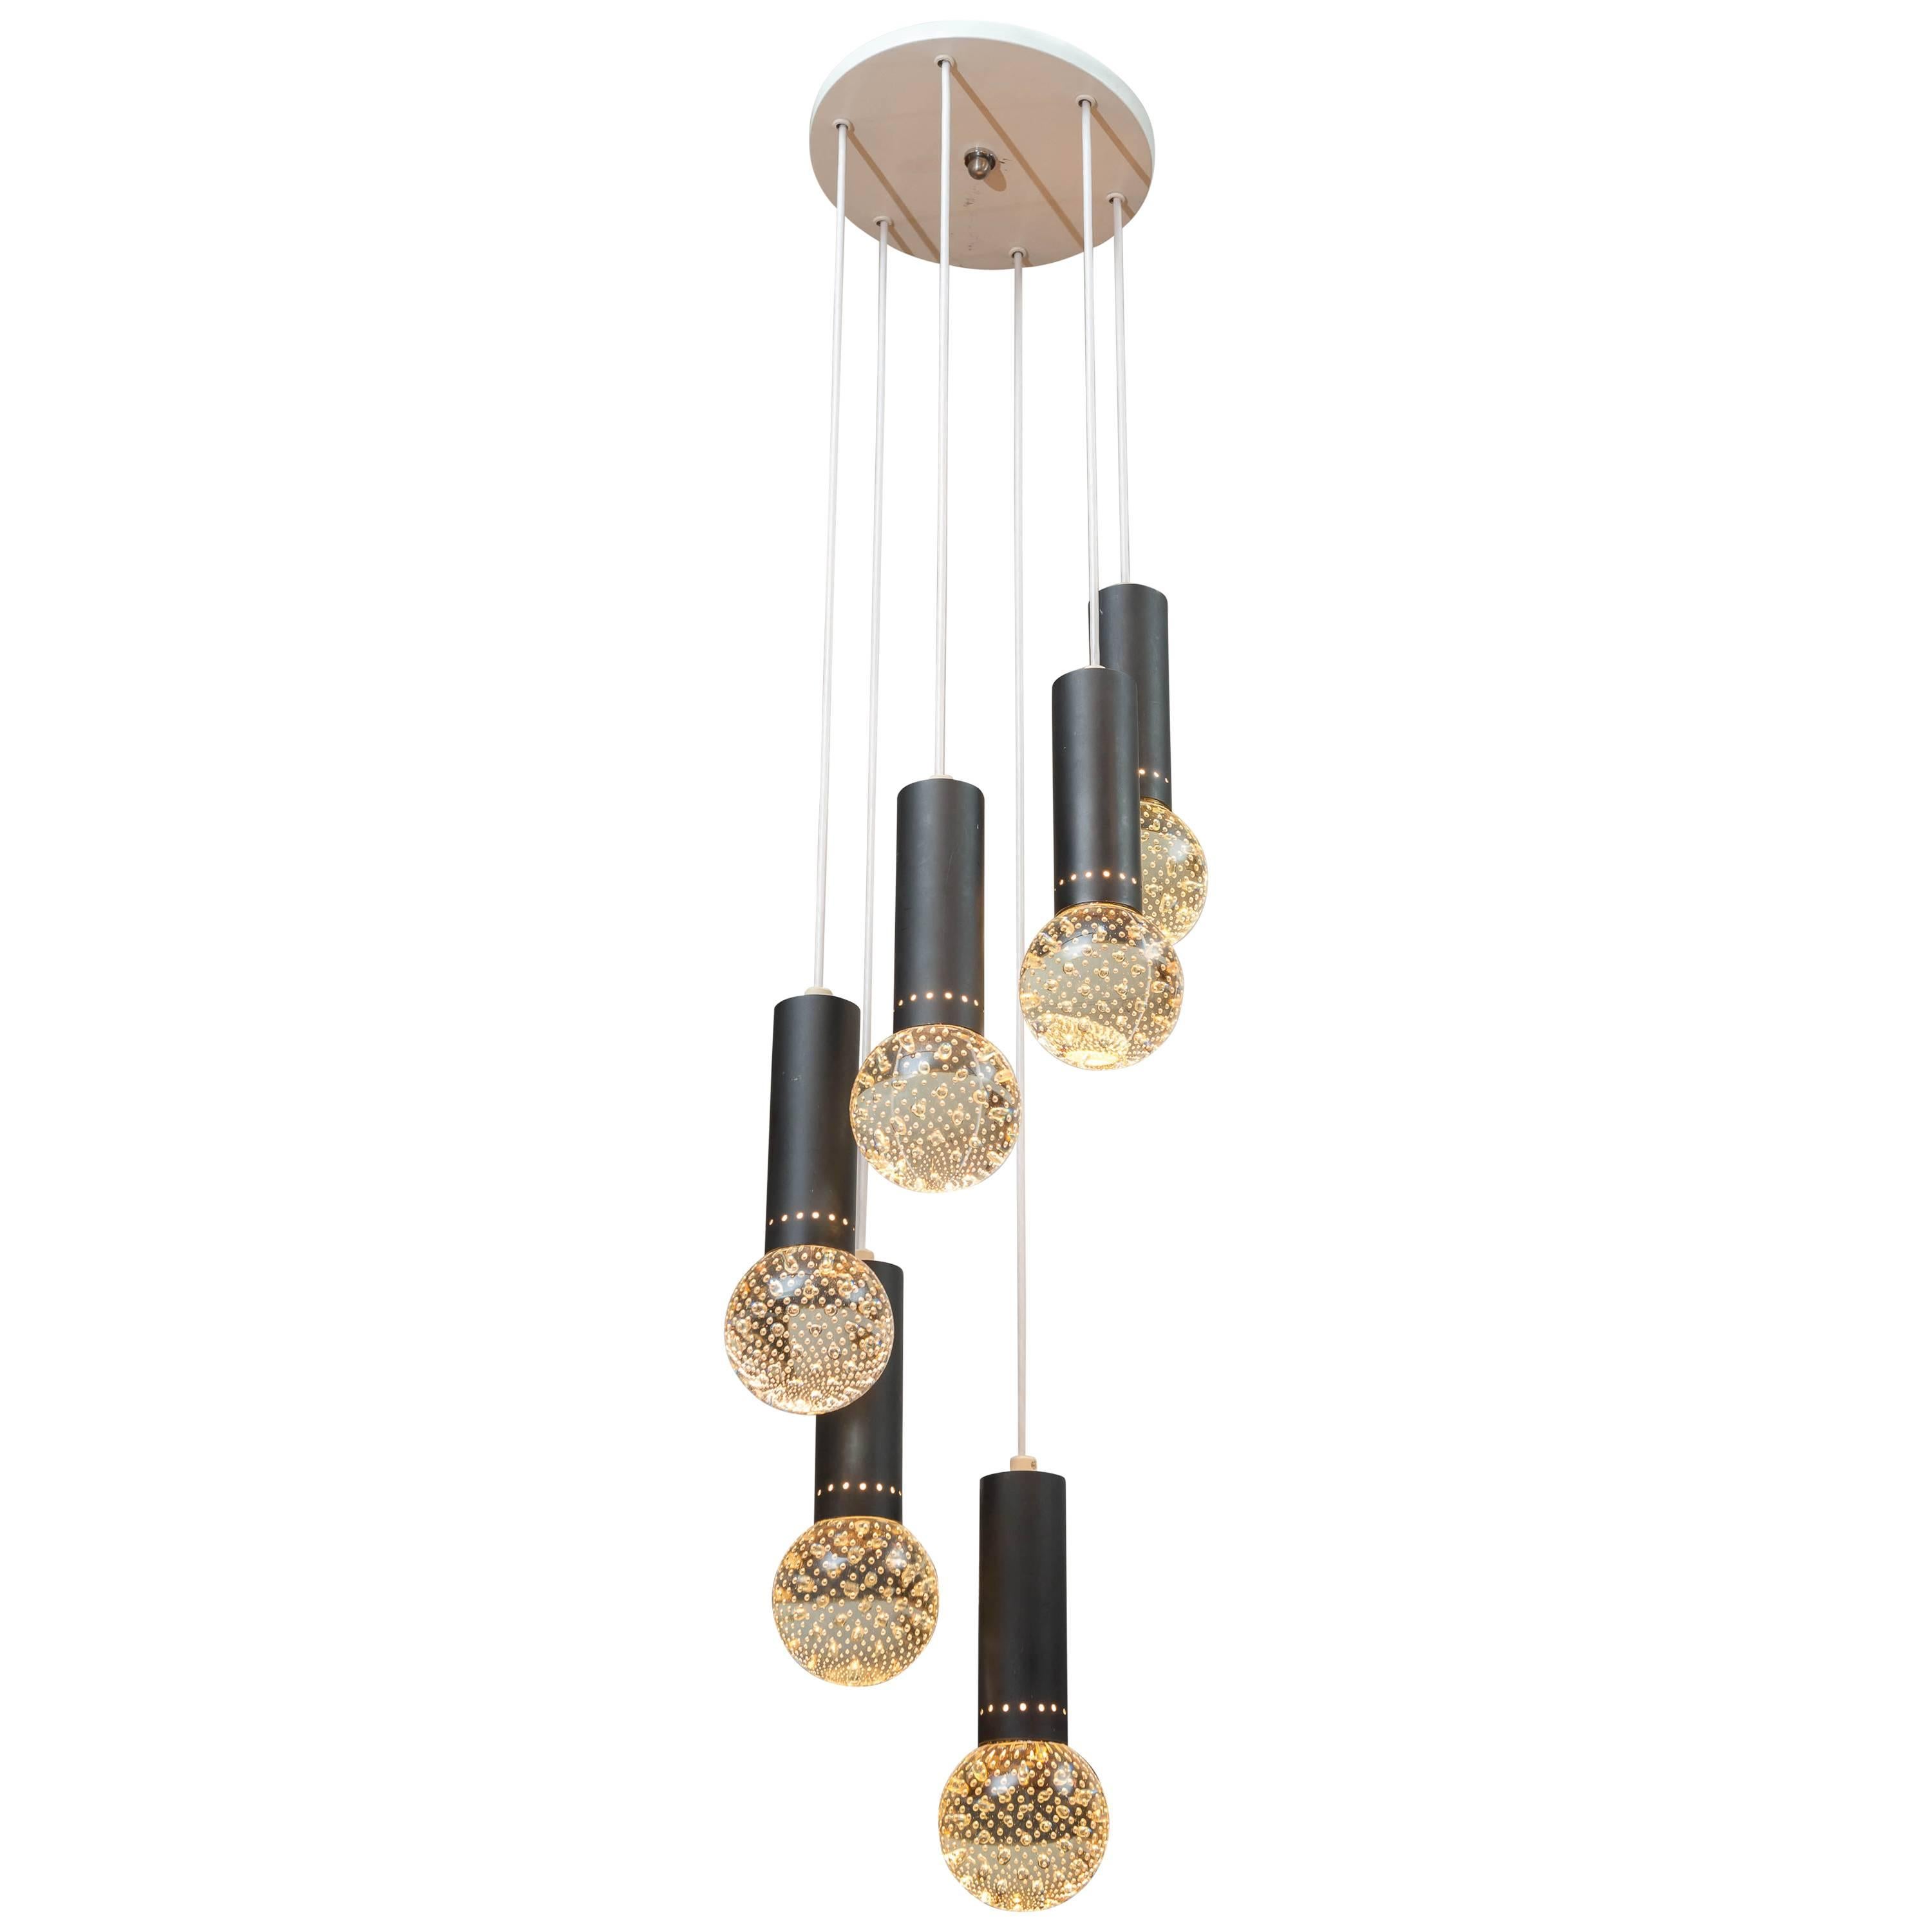 Bubble Light Chandelier in the style of Gino Sarfatti